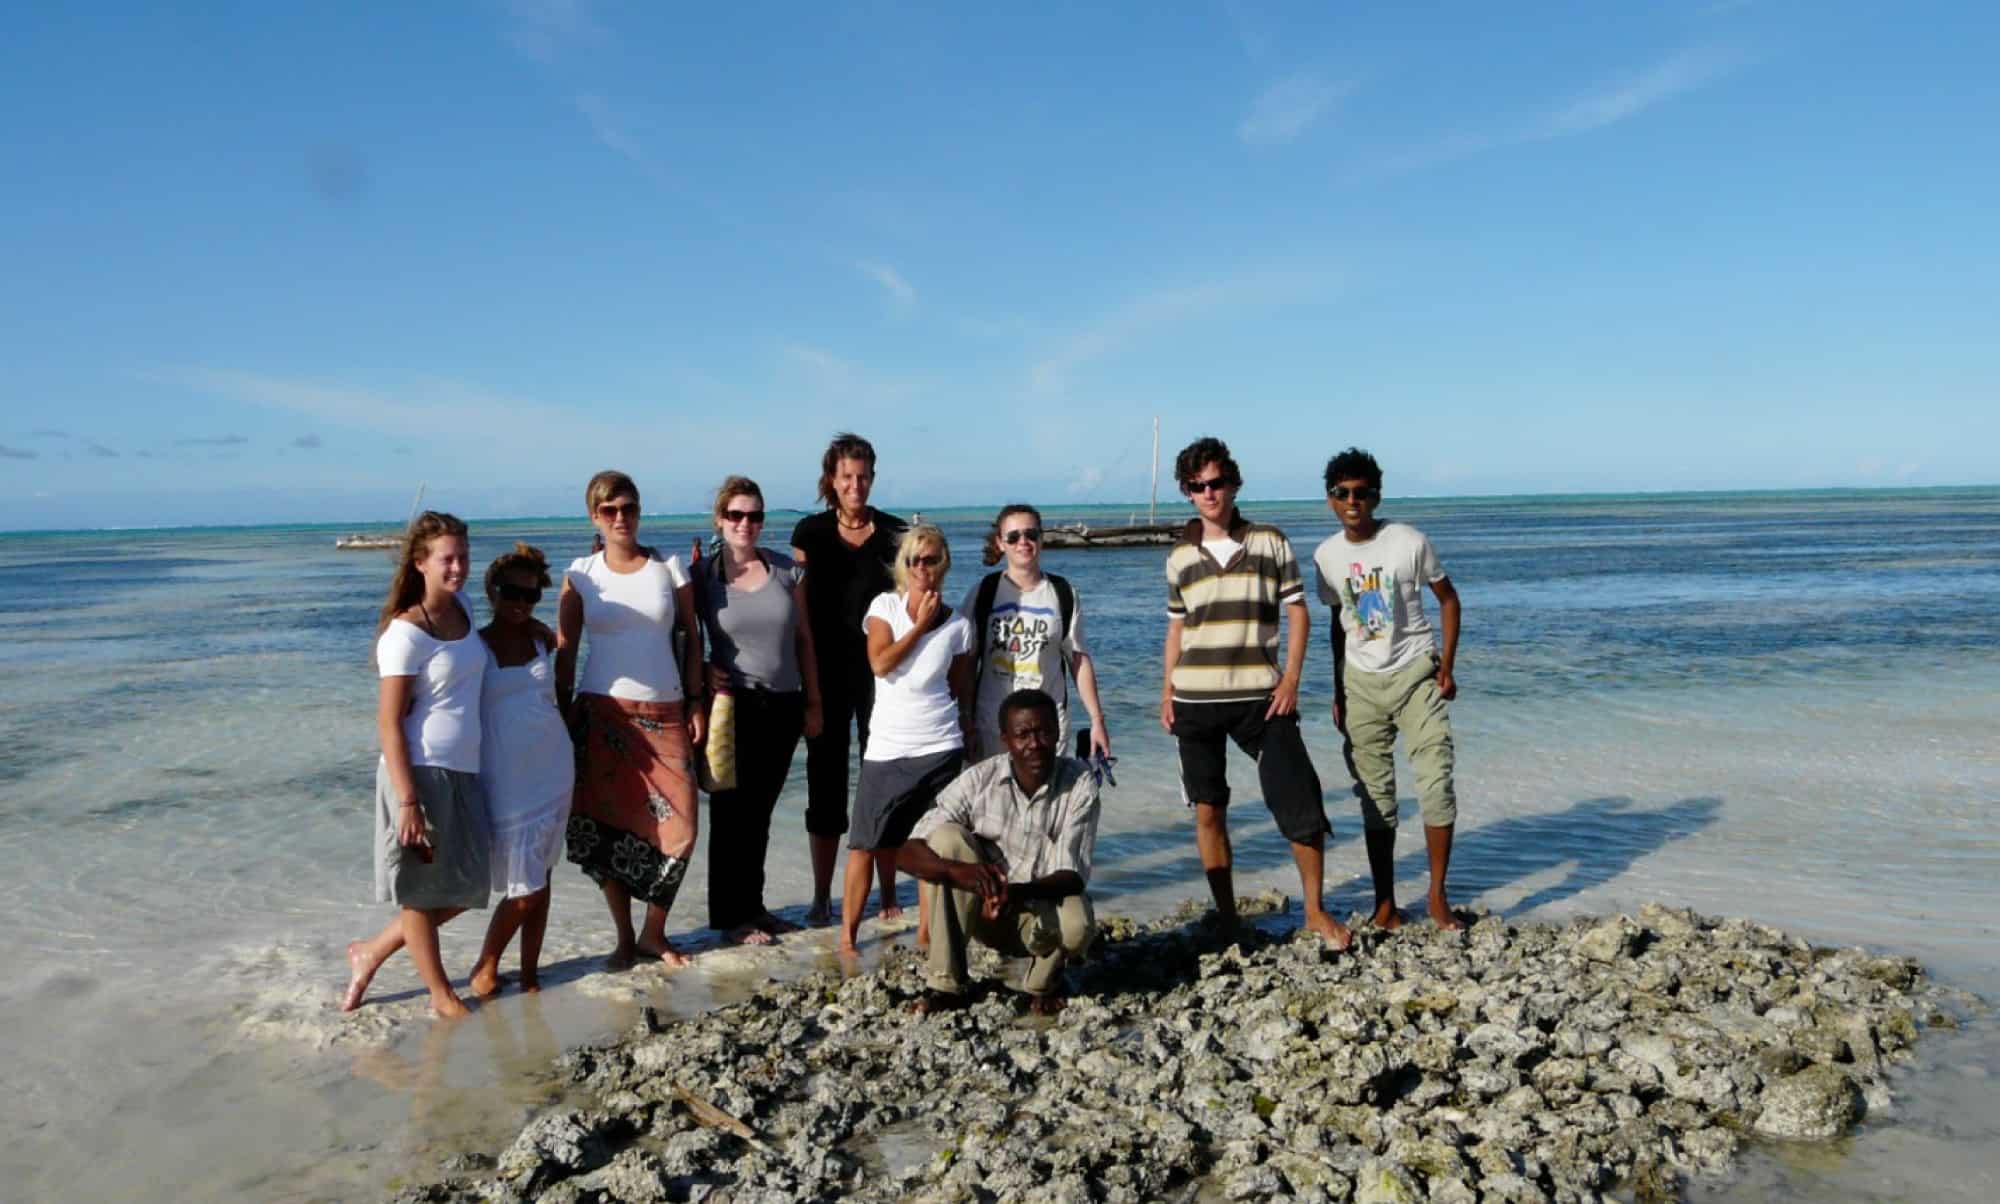 Group of people standing in the sea for a photo